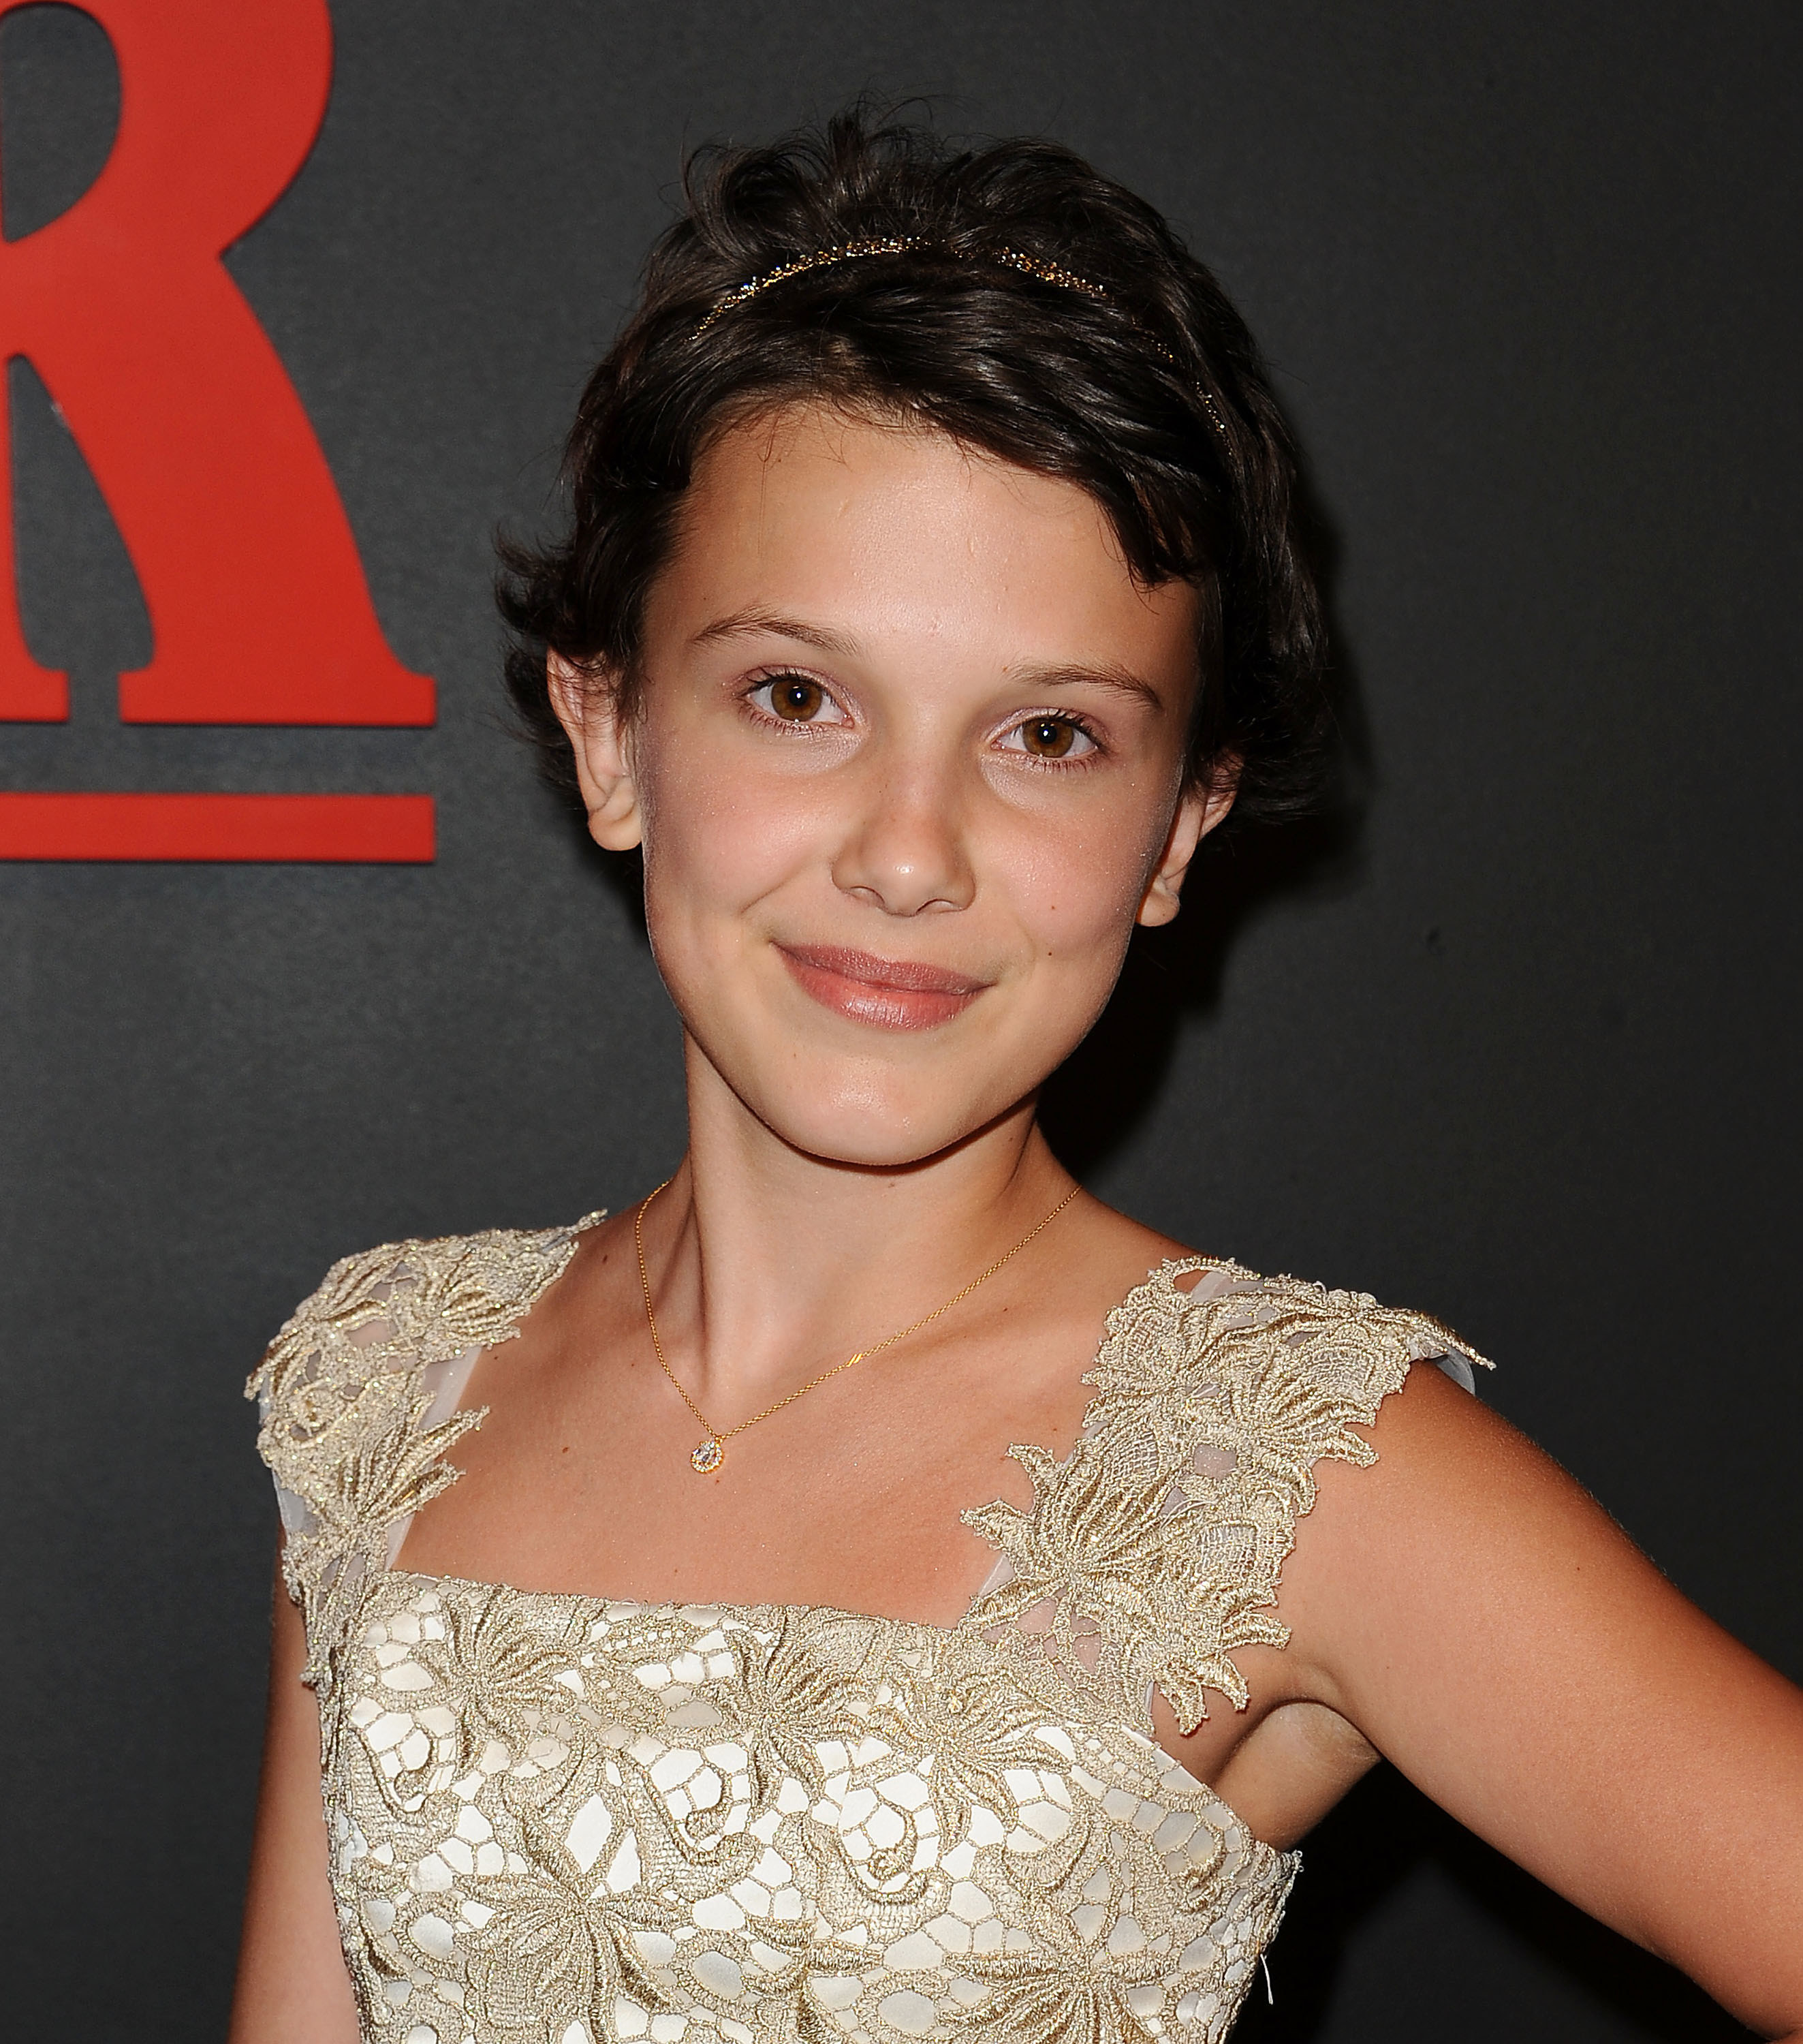 Millie Bobby Brown On Being Sexualized After Her18th Birthday